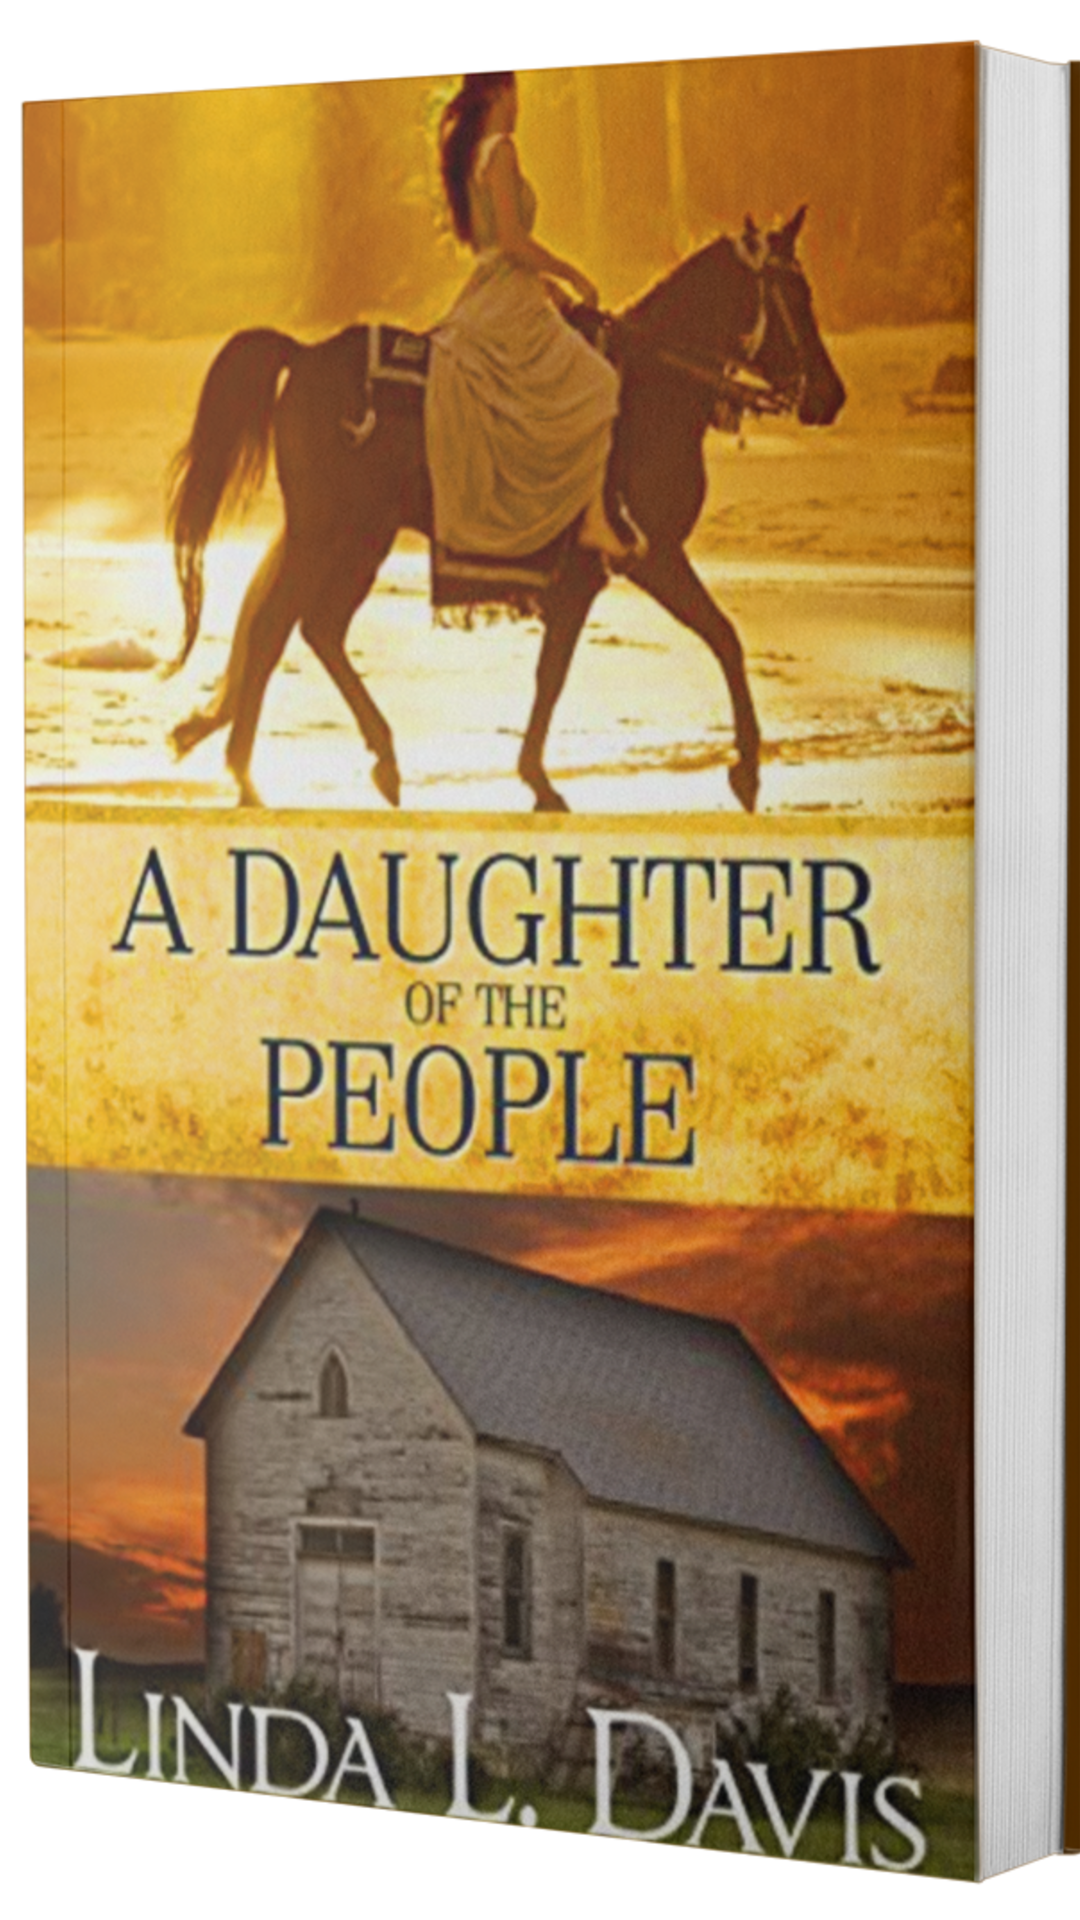 Link to purchase A Daughter of the People on Amazon